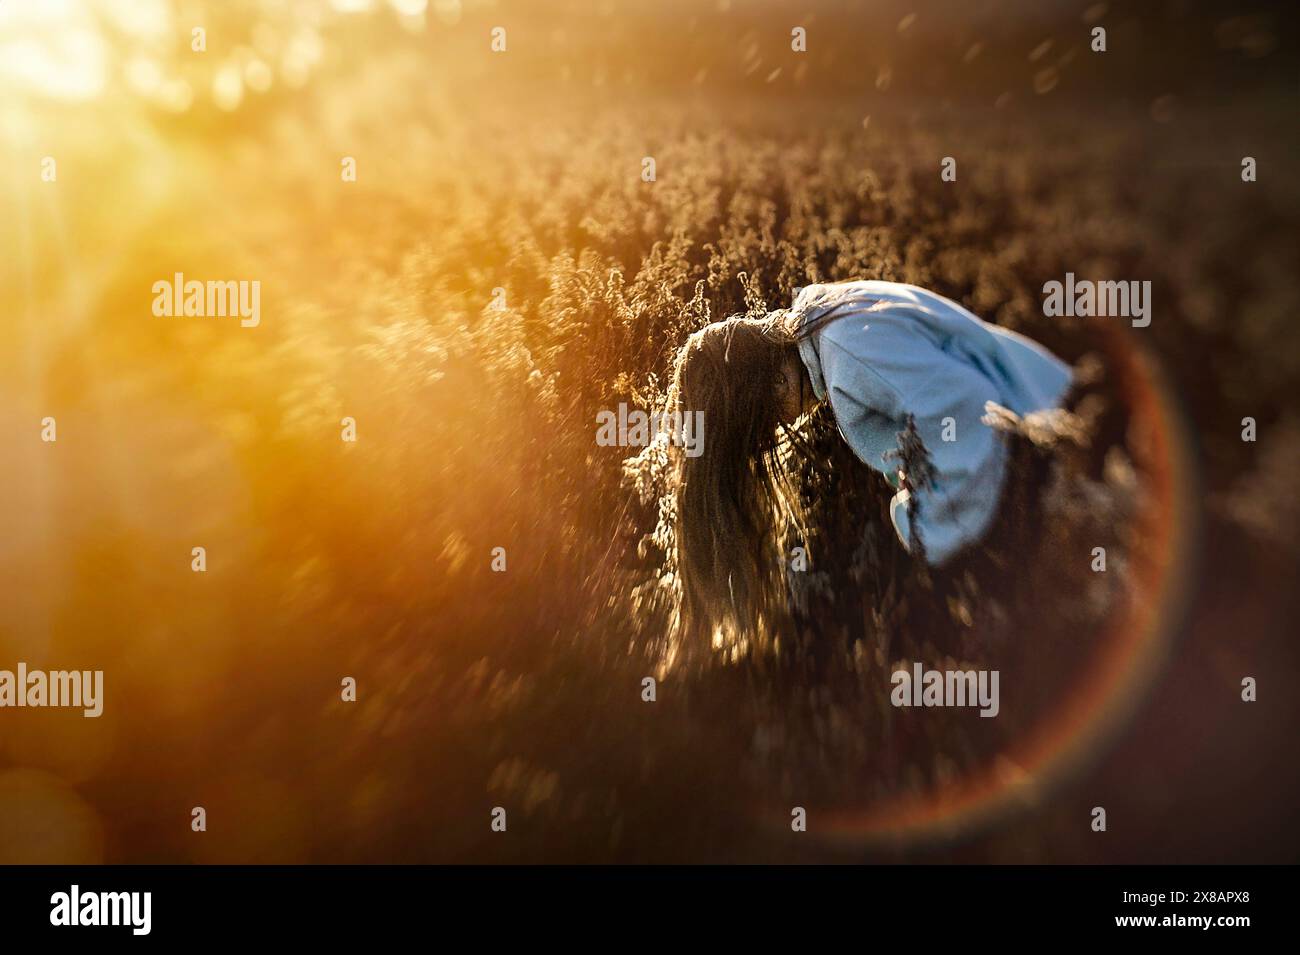 Young girl with long blonde hair bowing in sunny wheat field Stock Photo